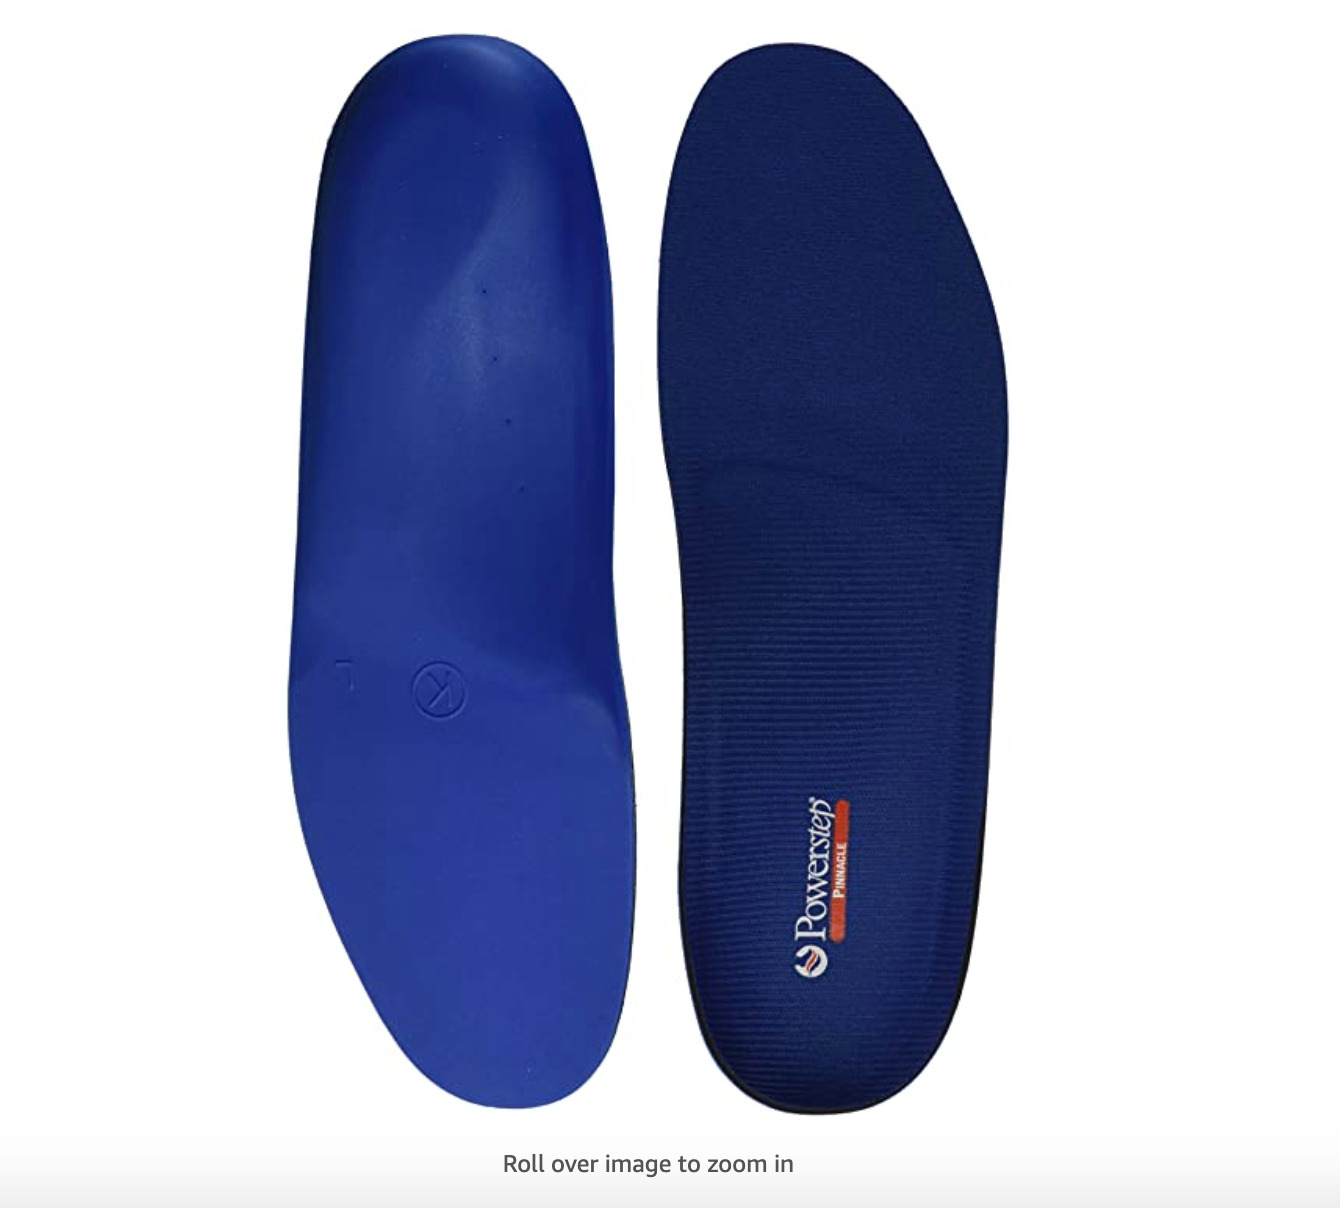 Powerstep Full Length Orthotics Arch Heel Support Insole